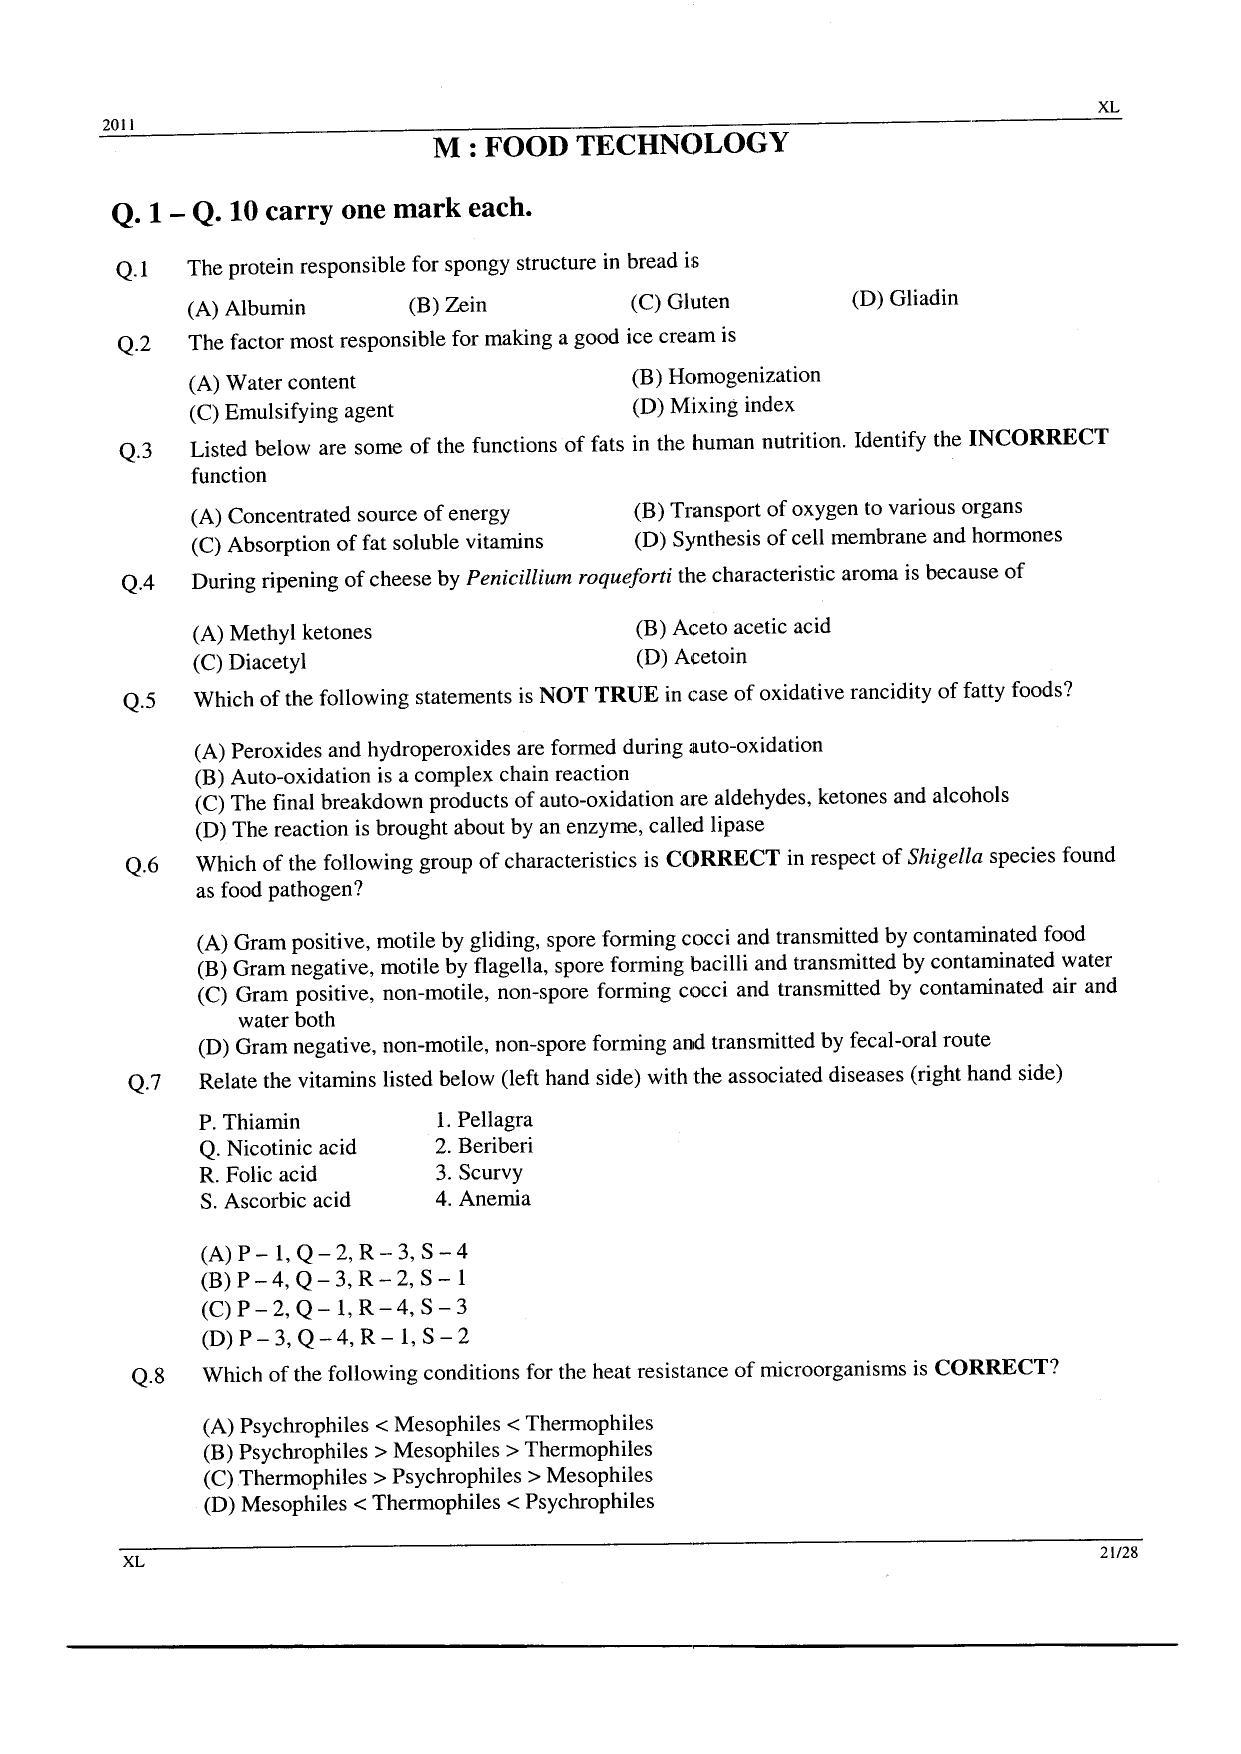 GATE 2011 Life Sciences (XL) Question Paper with Answer Key - Page 21